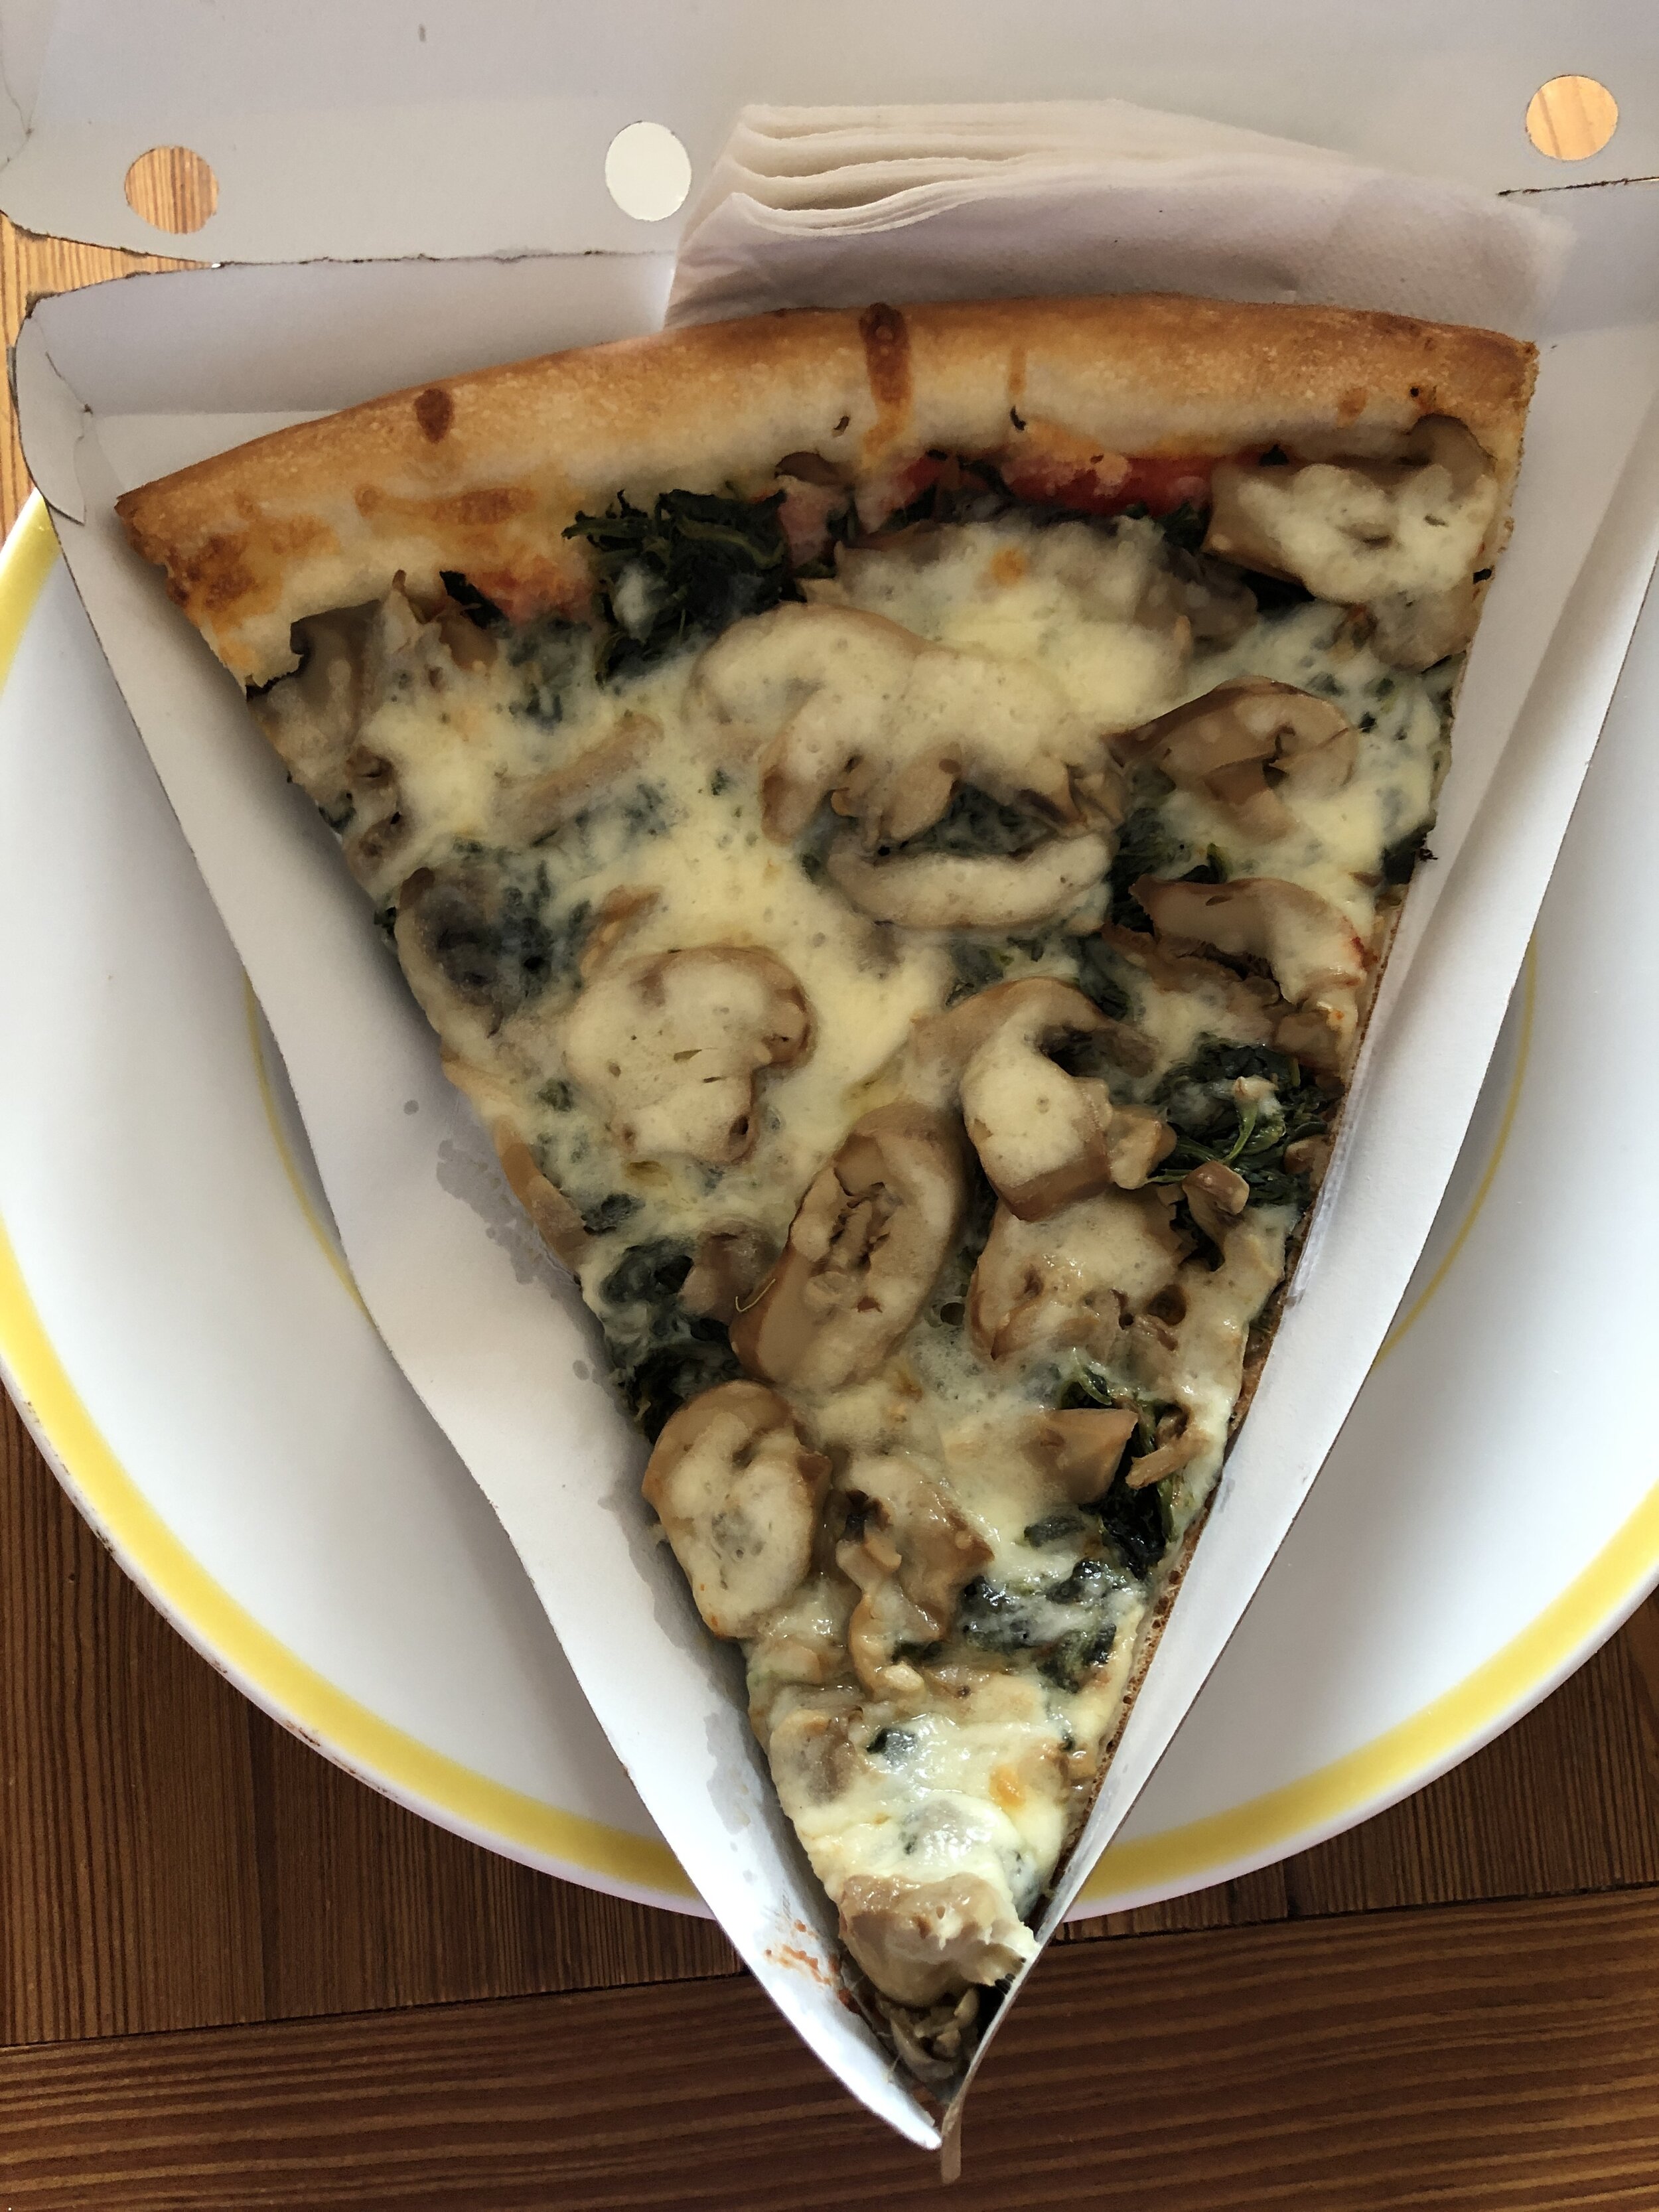 Spinach, mushrooms and mozz!